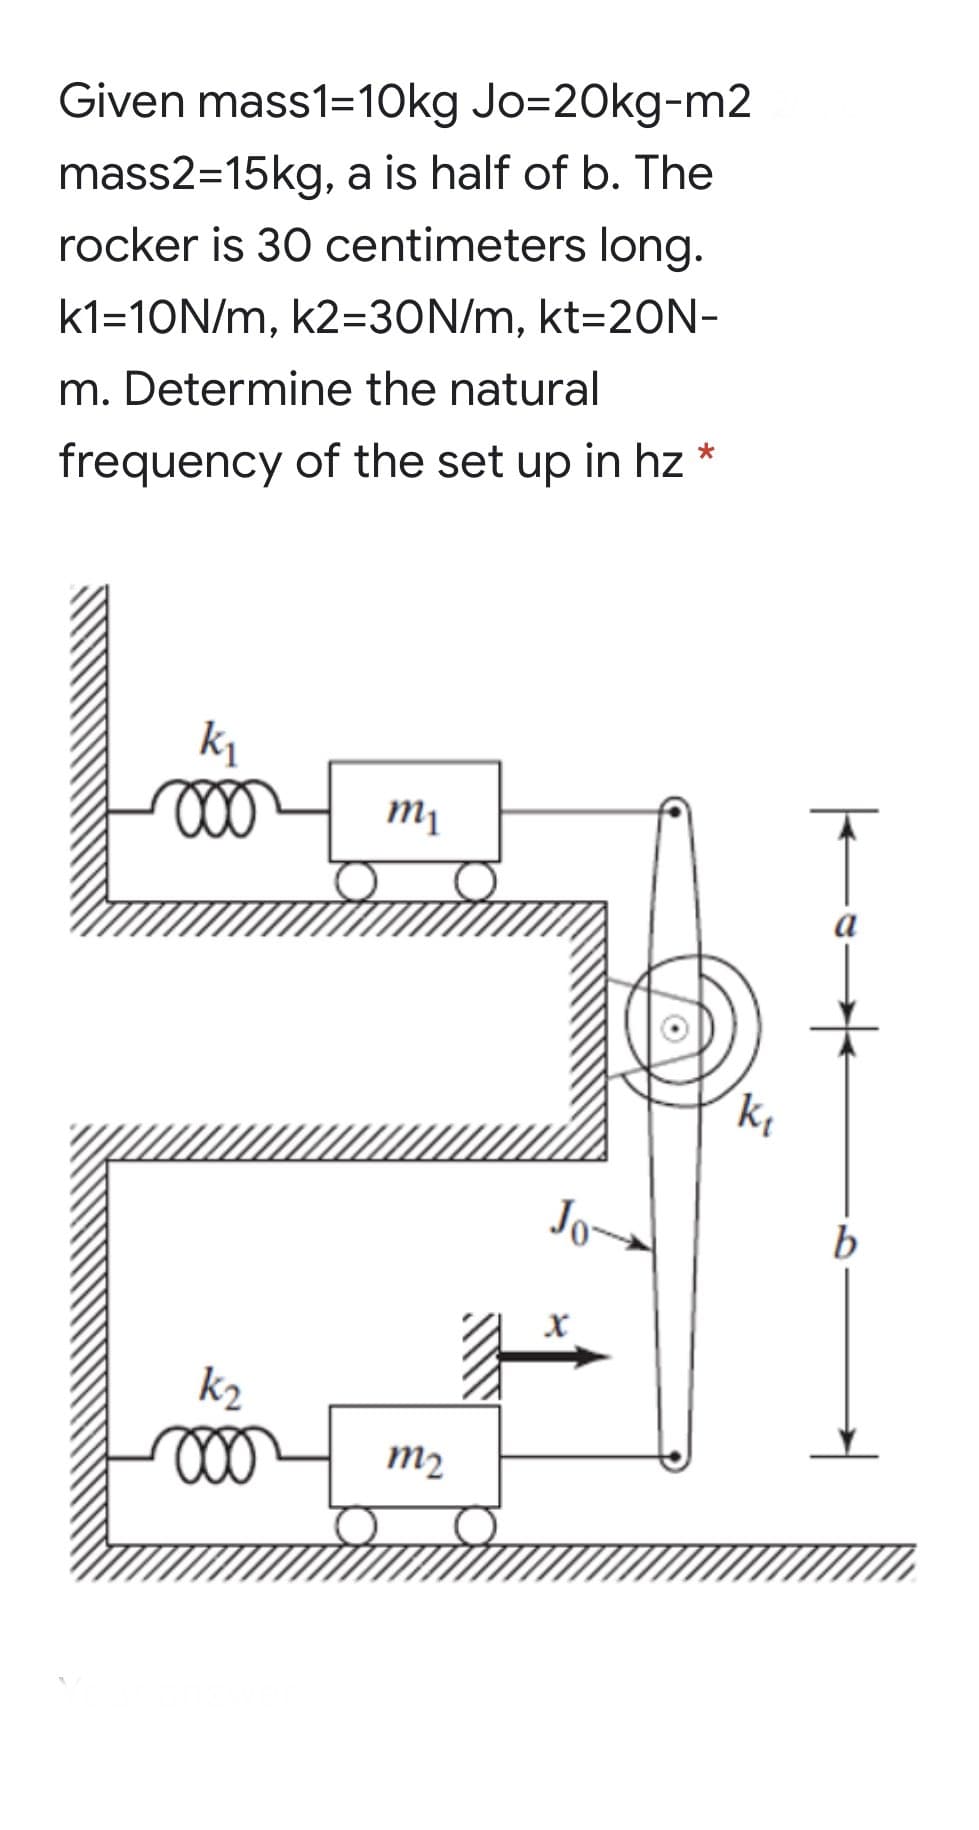 Given mass1=10kg Jo=20kg-m2
mass2=15kg, a is half of b. The
rocker is 30 centimeters long.
k1=10N/m, k2=30N/m, kt=20N-
m. Determine the natural
frequency of the set up in hz
k1
m1
a
Jo
b
k2
m2
